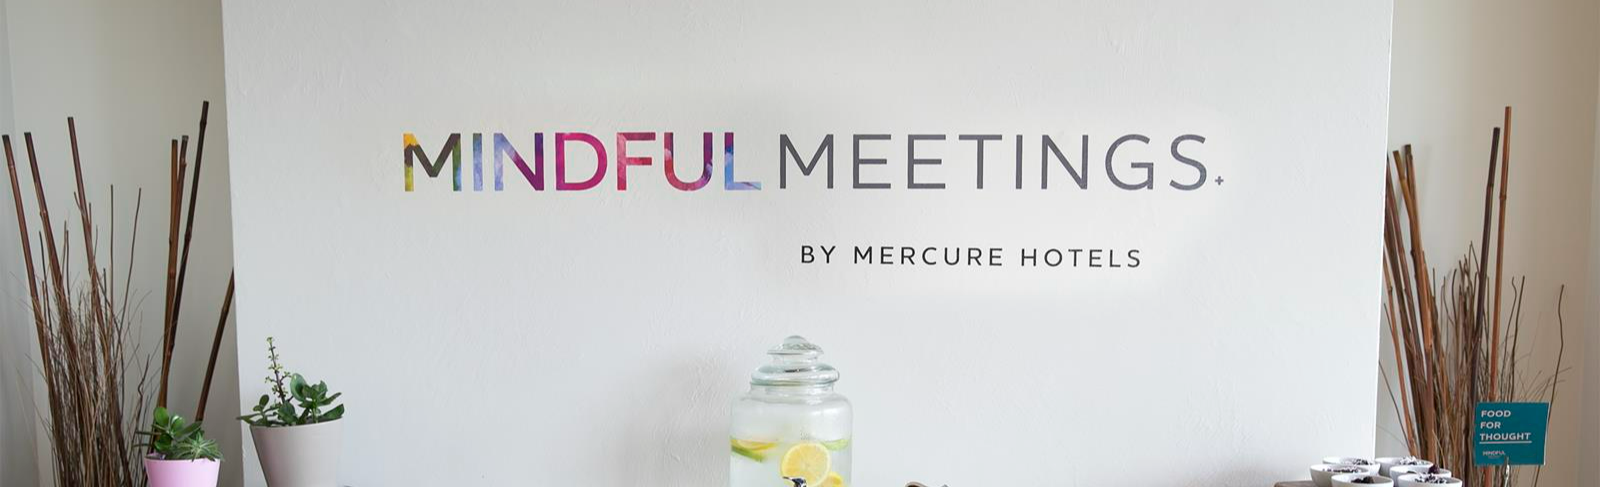 Mindful meetings wall background at Mercure Sydney Parramatta